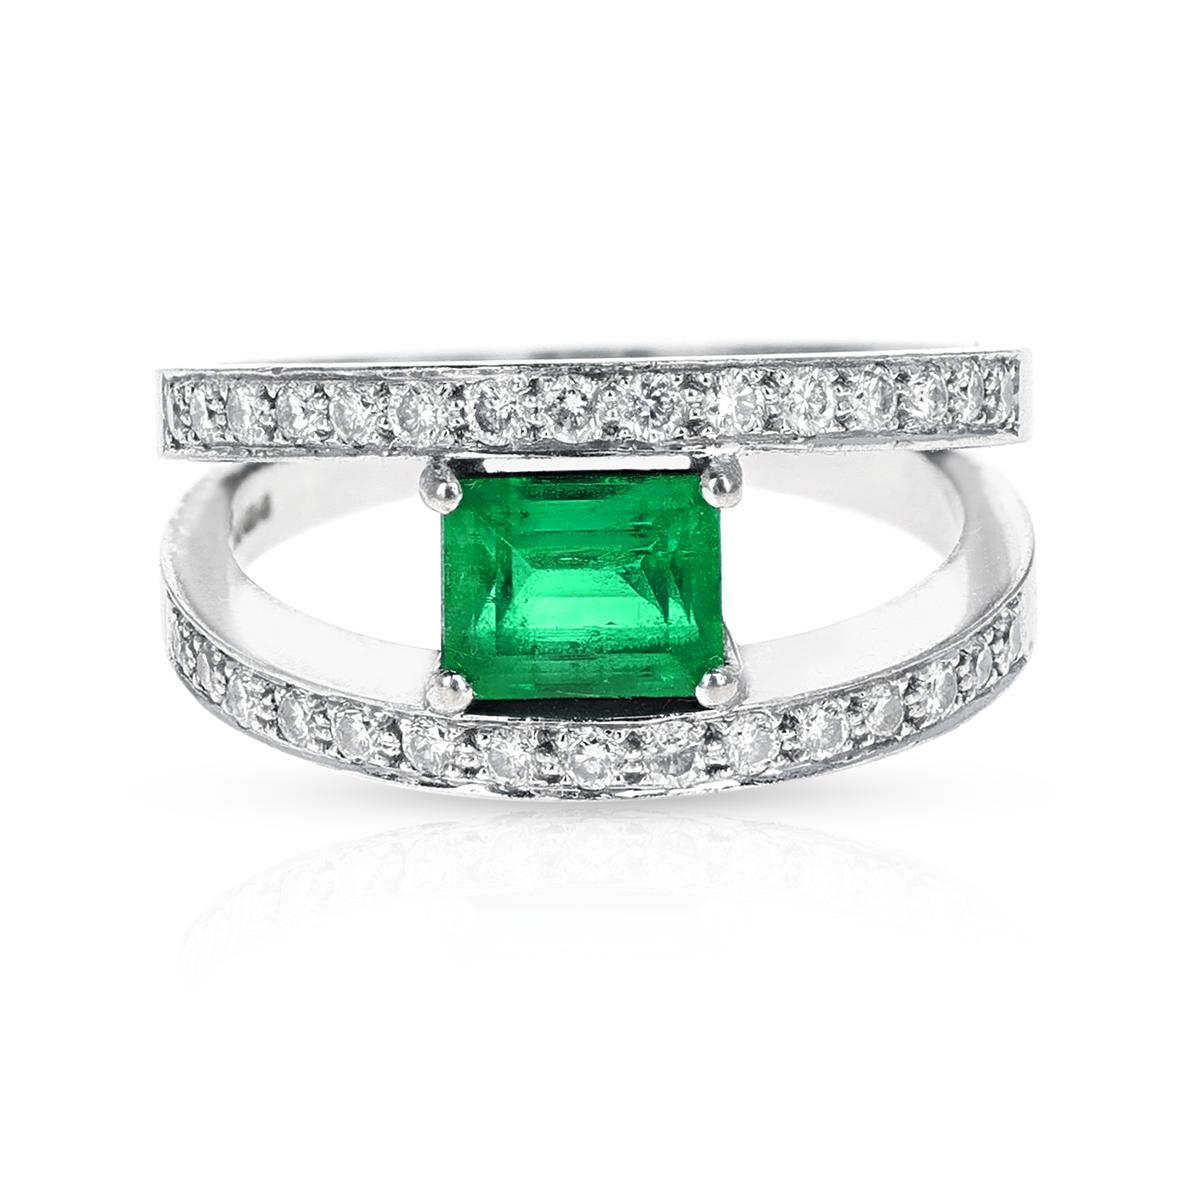 Emerald Cut Emerald-Cut Emerald and Diamond Double Row Ring, 18k For Sale